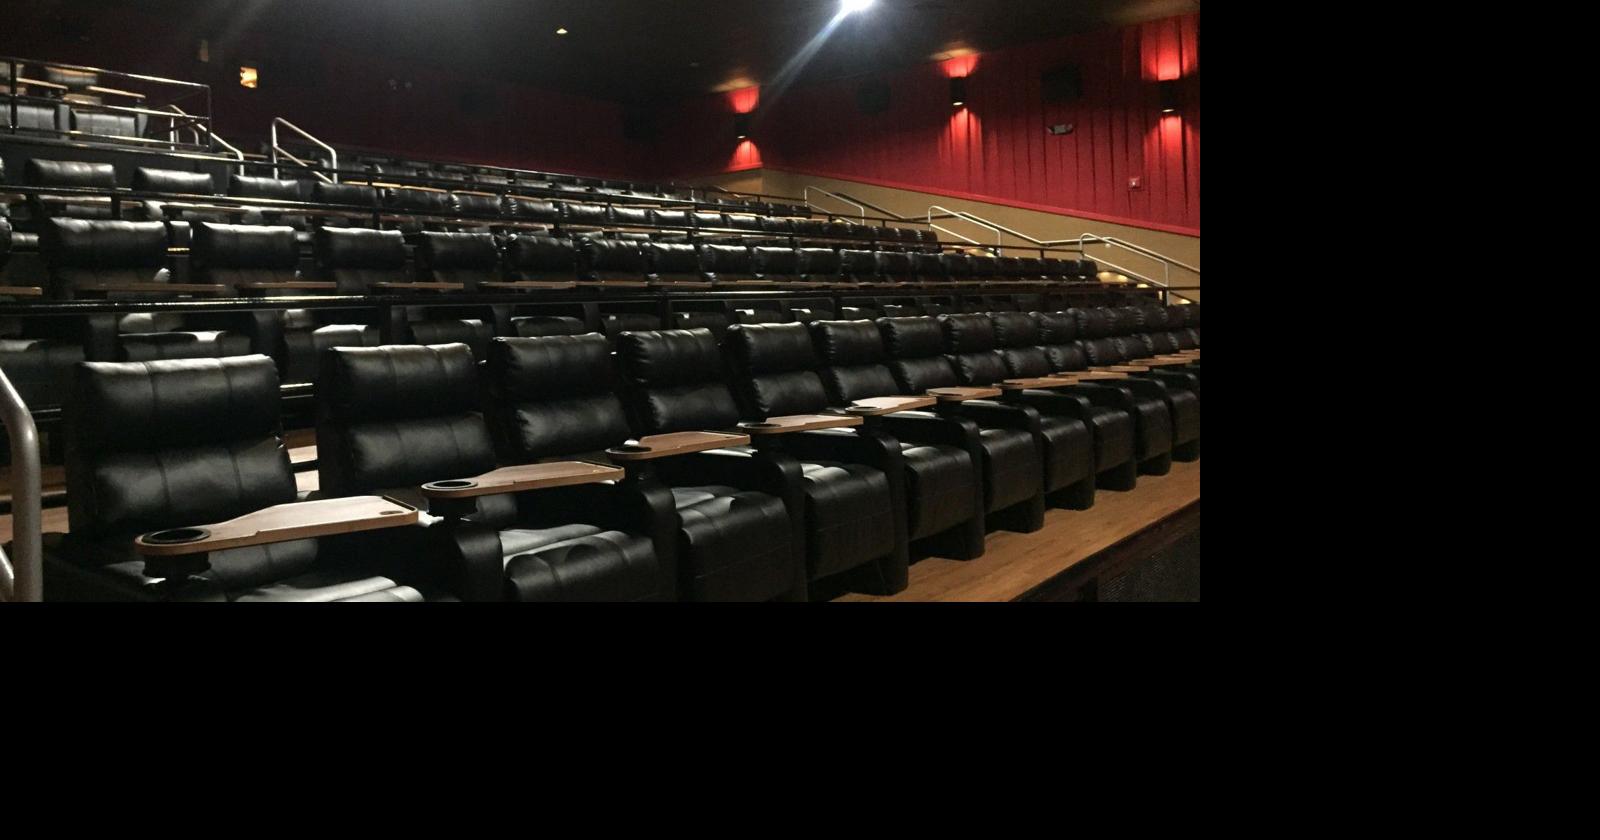 Recliners are coming to the Quaker Regal